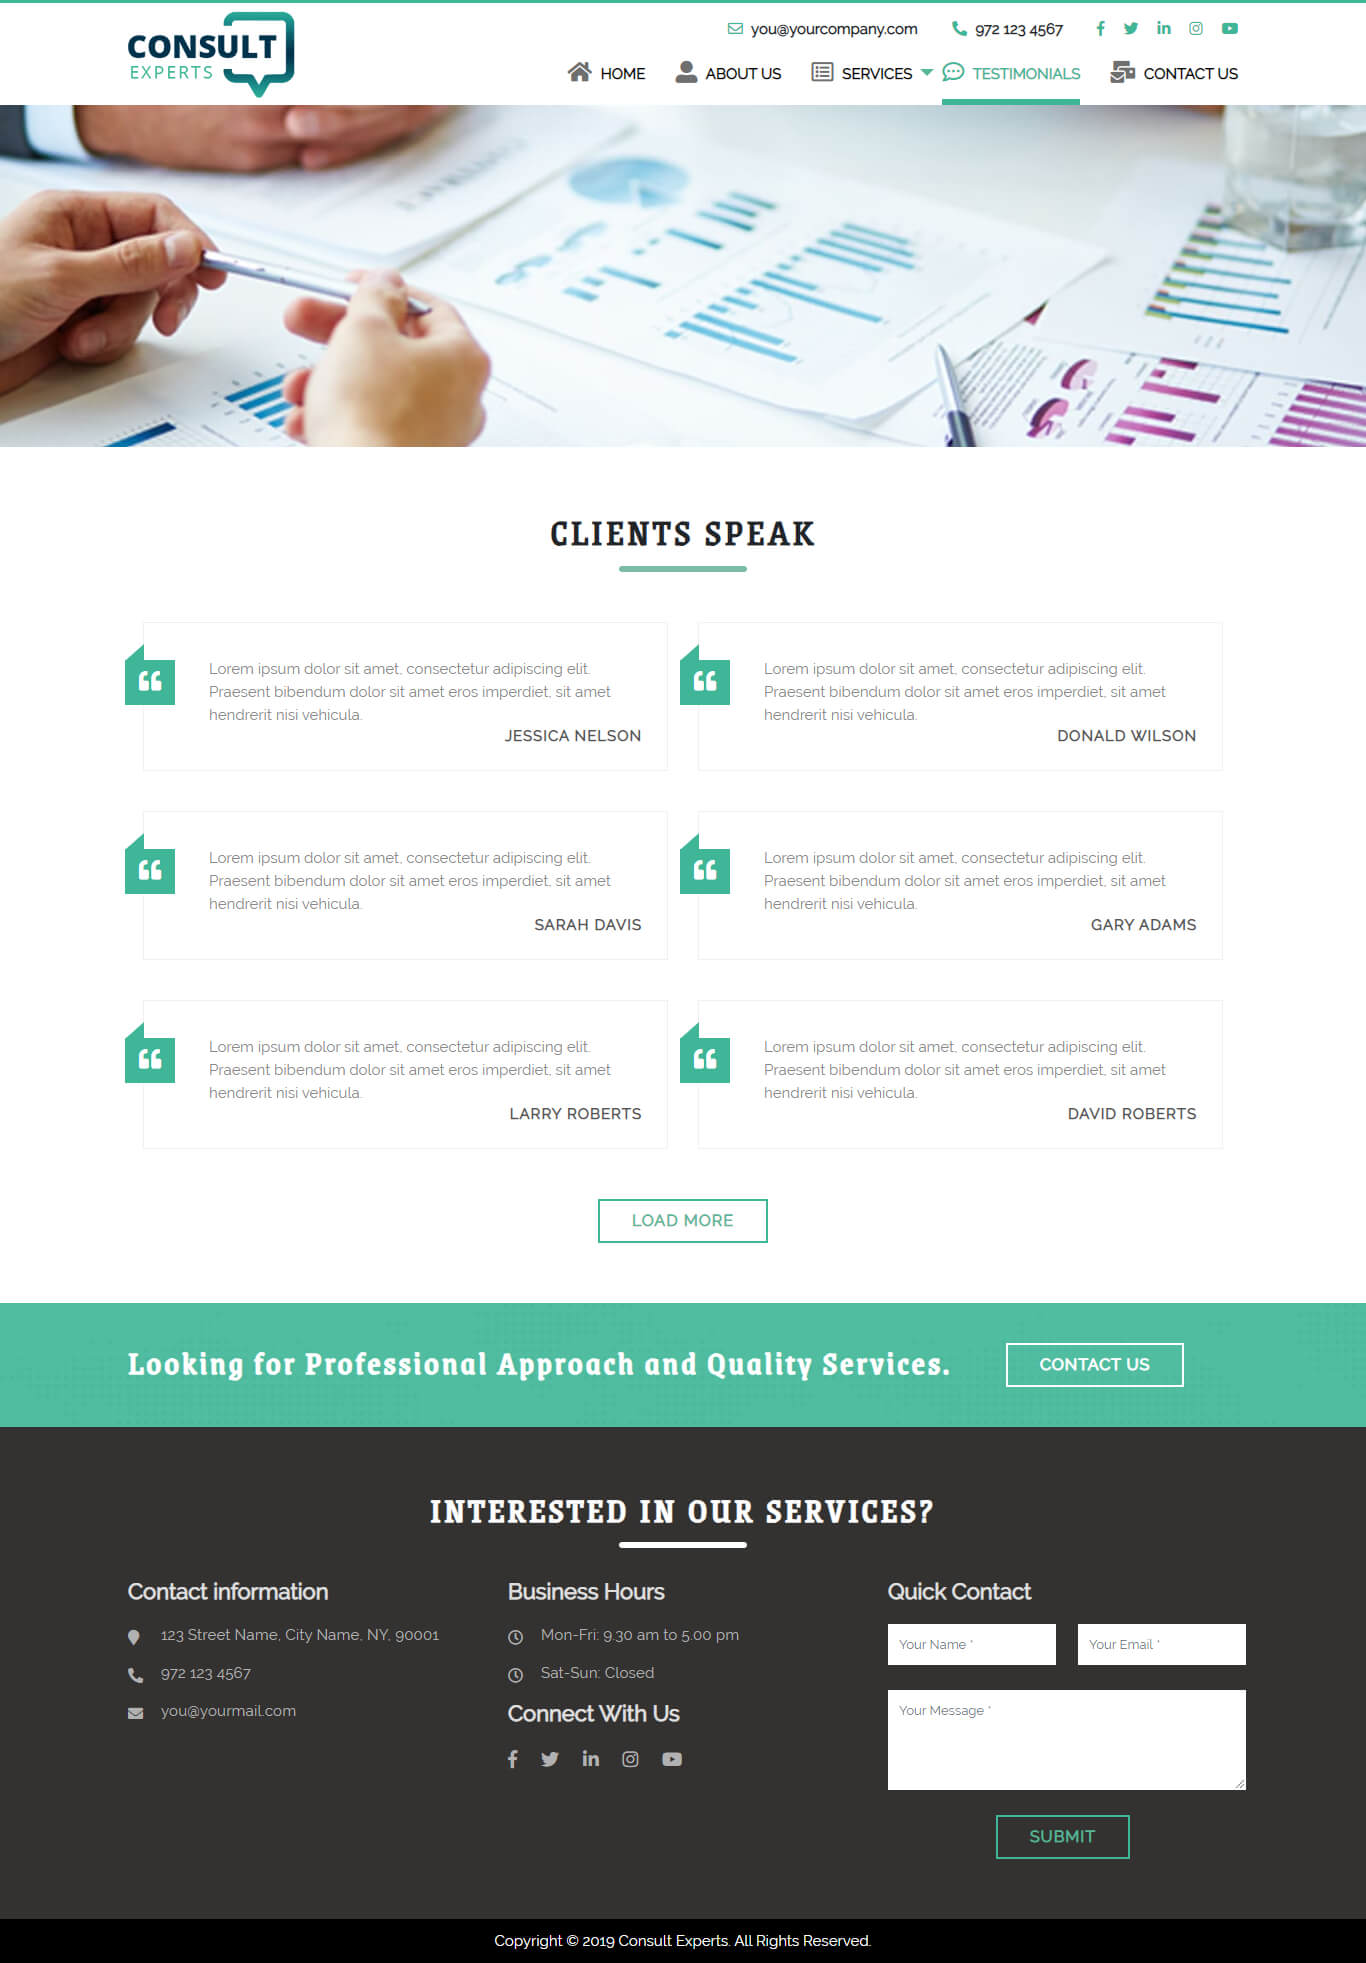 Readymade Human Resources Website Design from 39/mo. Lease A Website